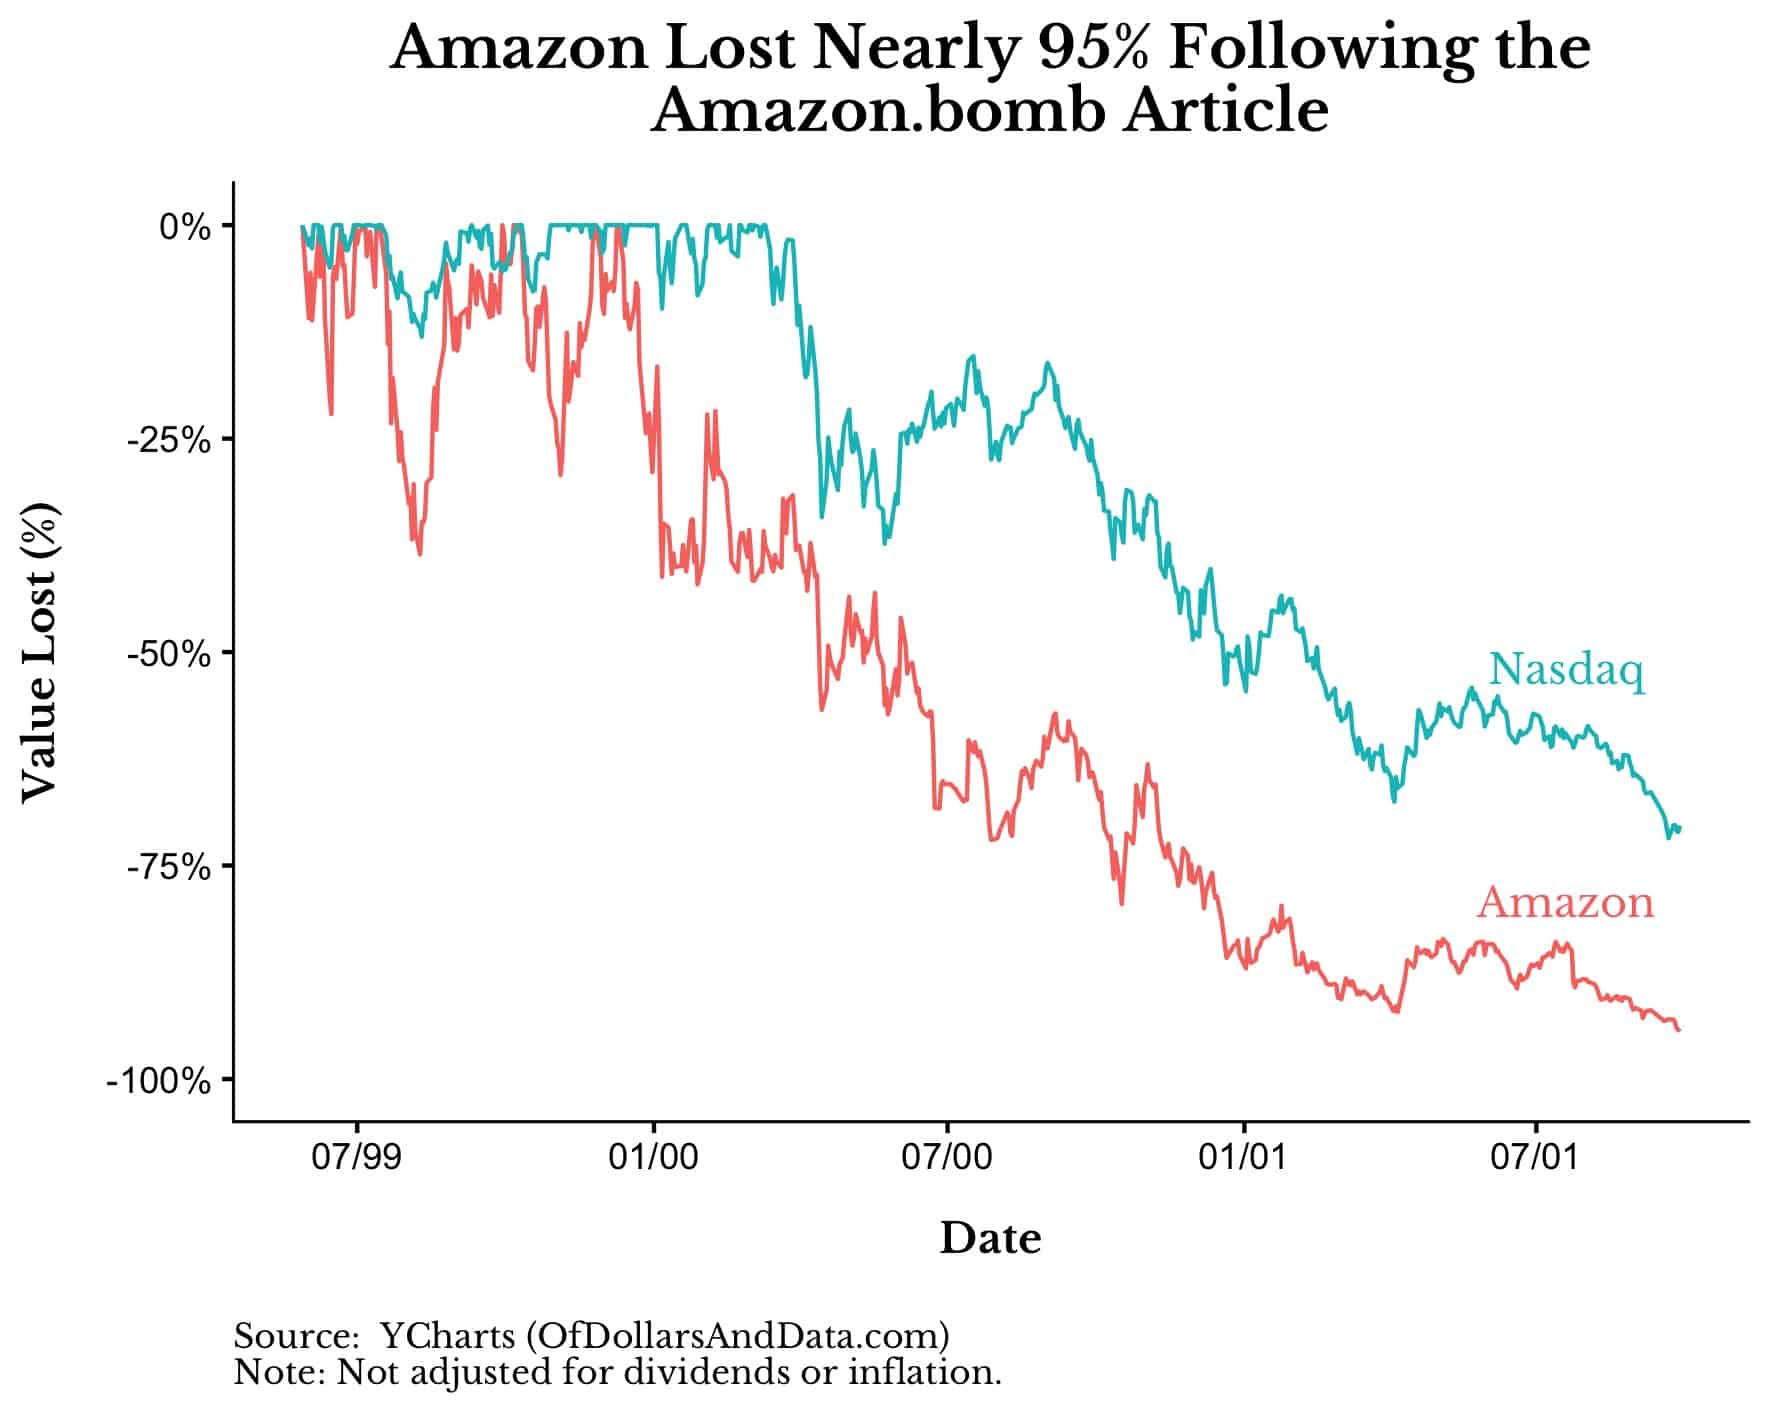 Chart of Amazon stock price vs NASDAQ from late 1999 to late 2001.